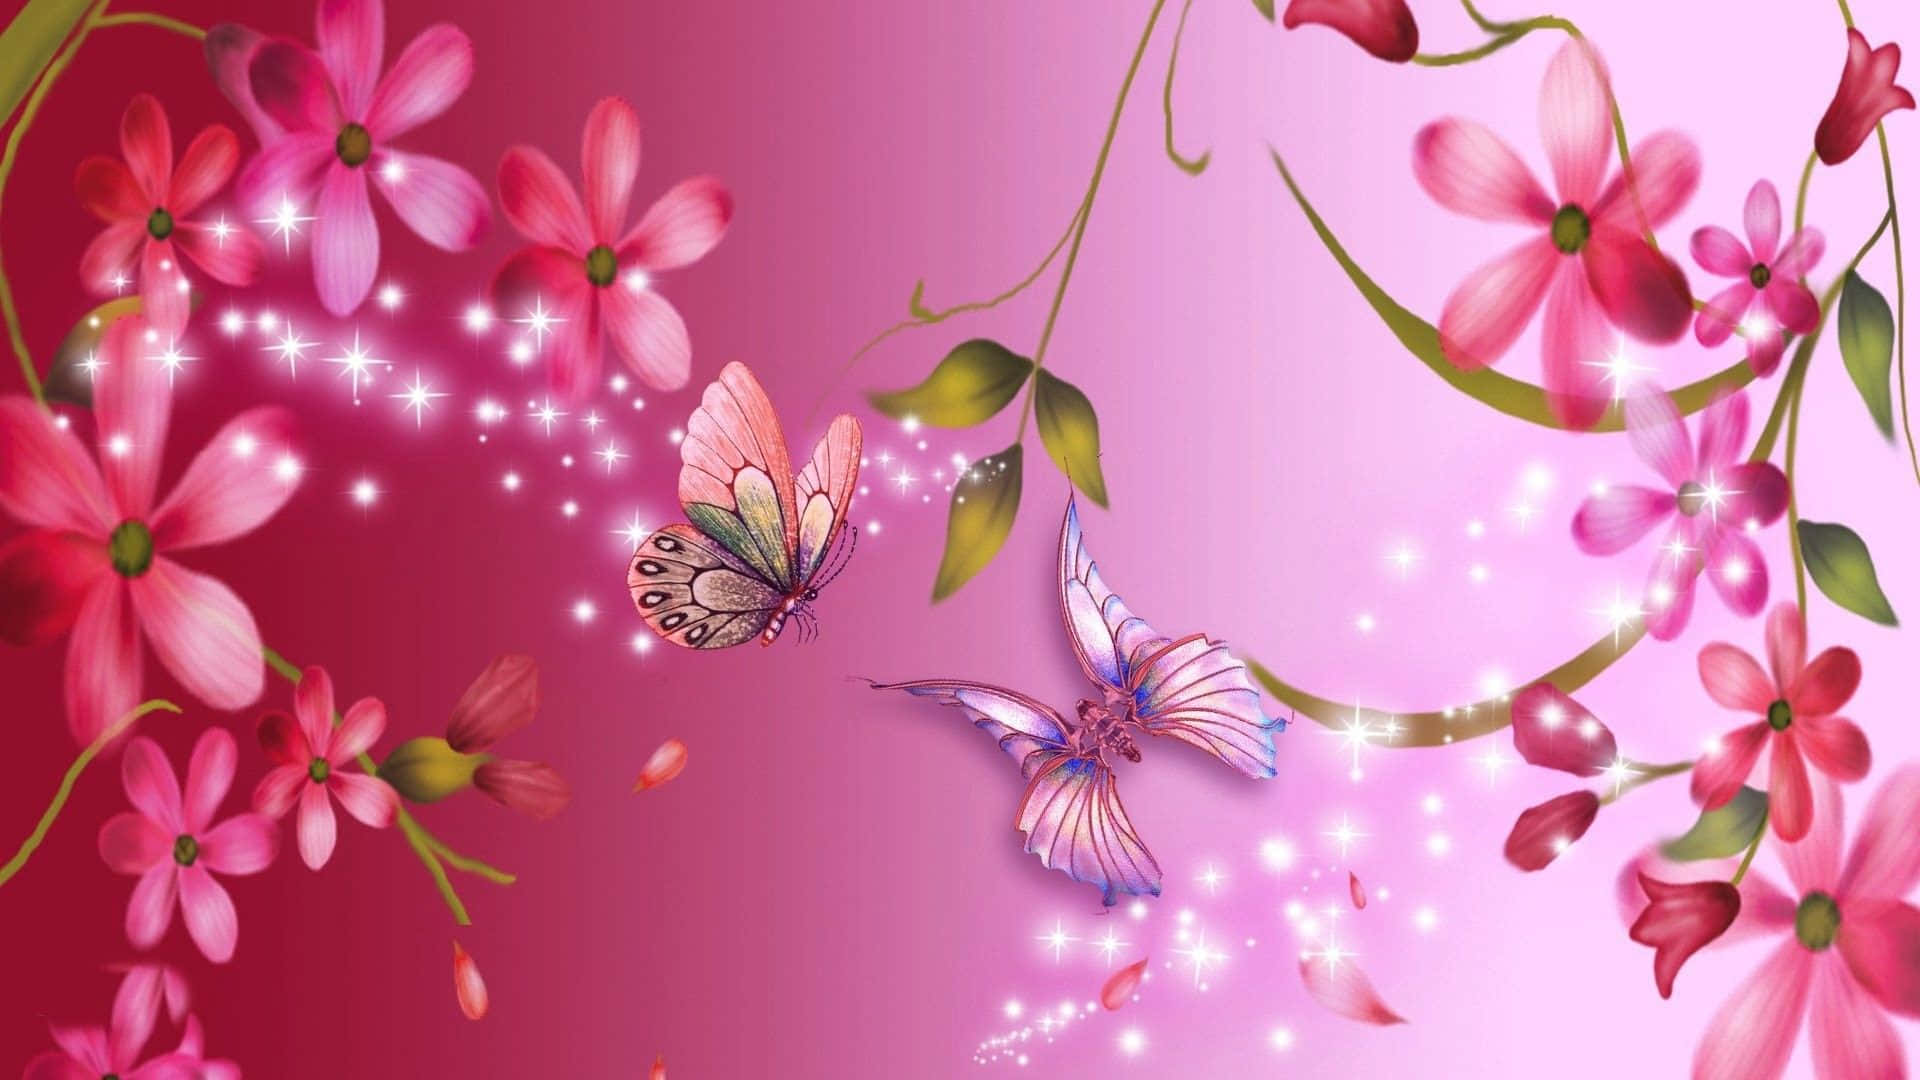 Pink Flowers With Butterflies And Leaves